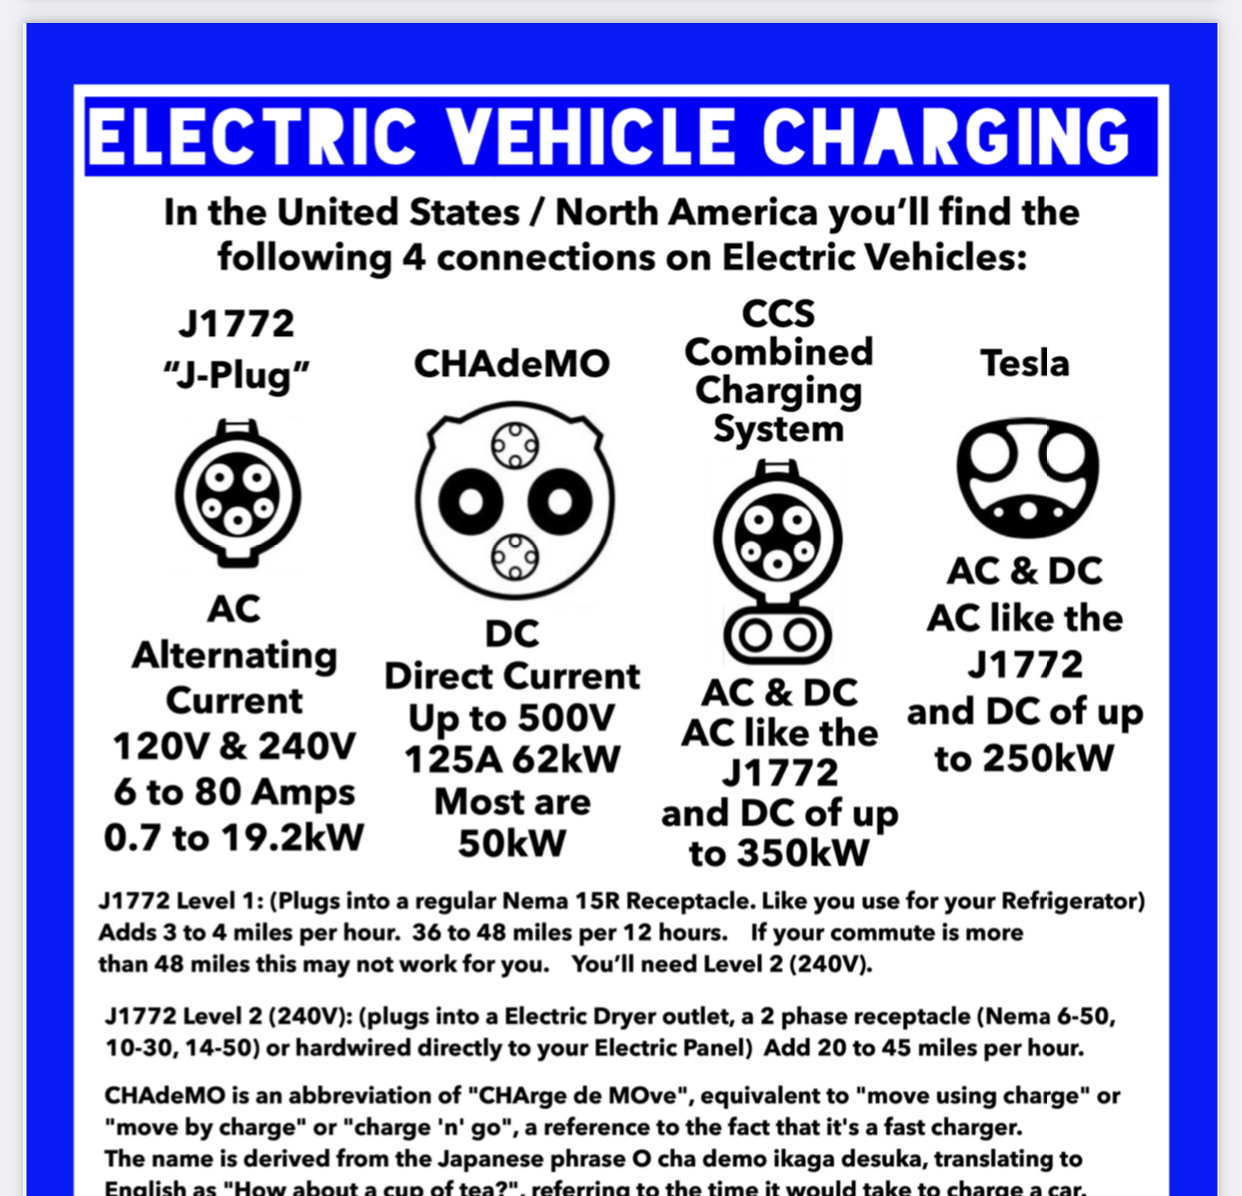 If you want to learn about EV Charging, then download my EVPDF and read page 6. Go to EVPDF.com